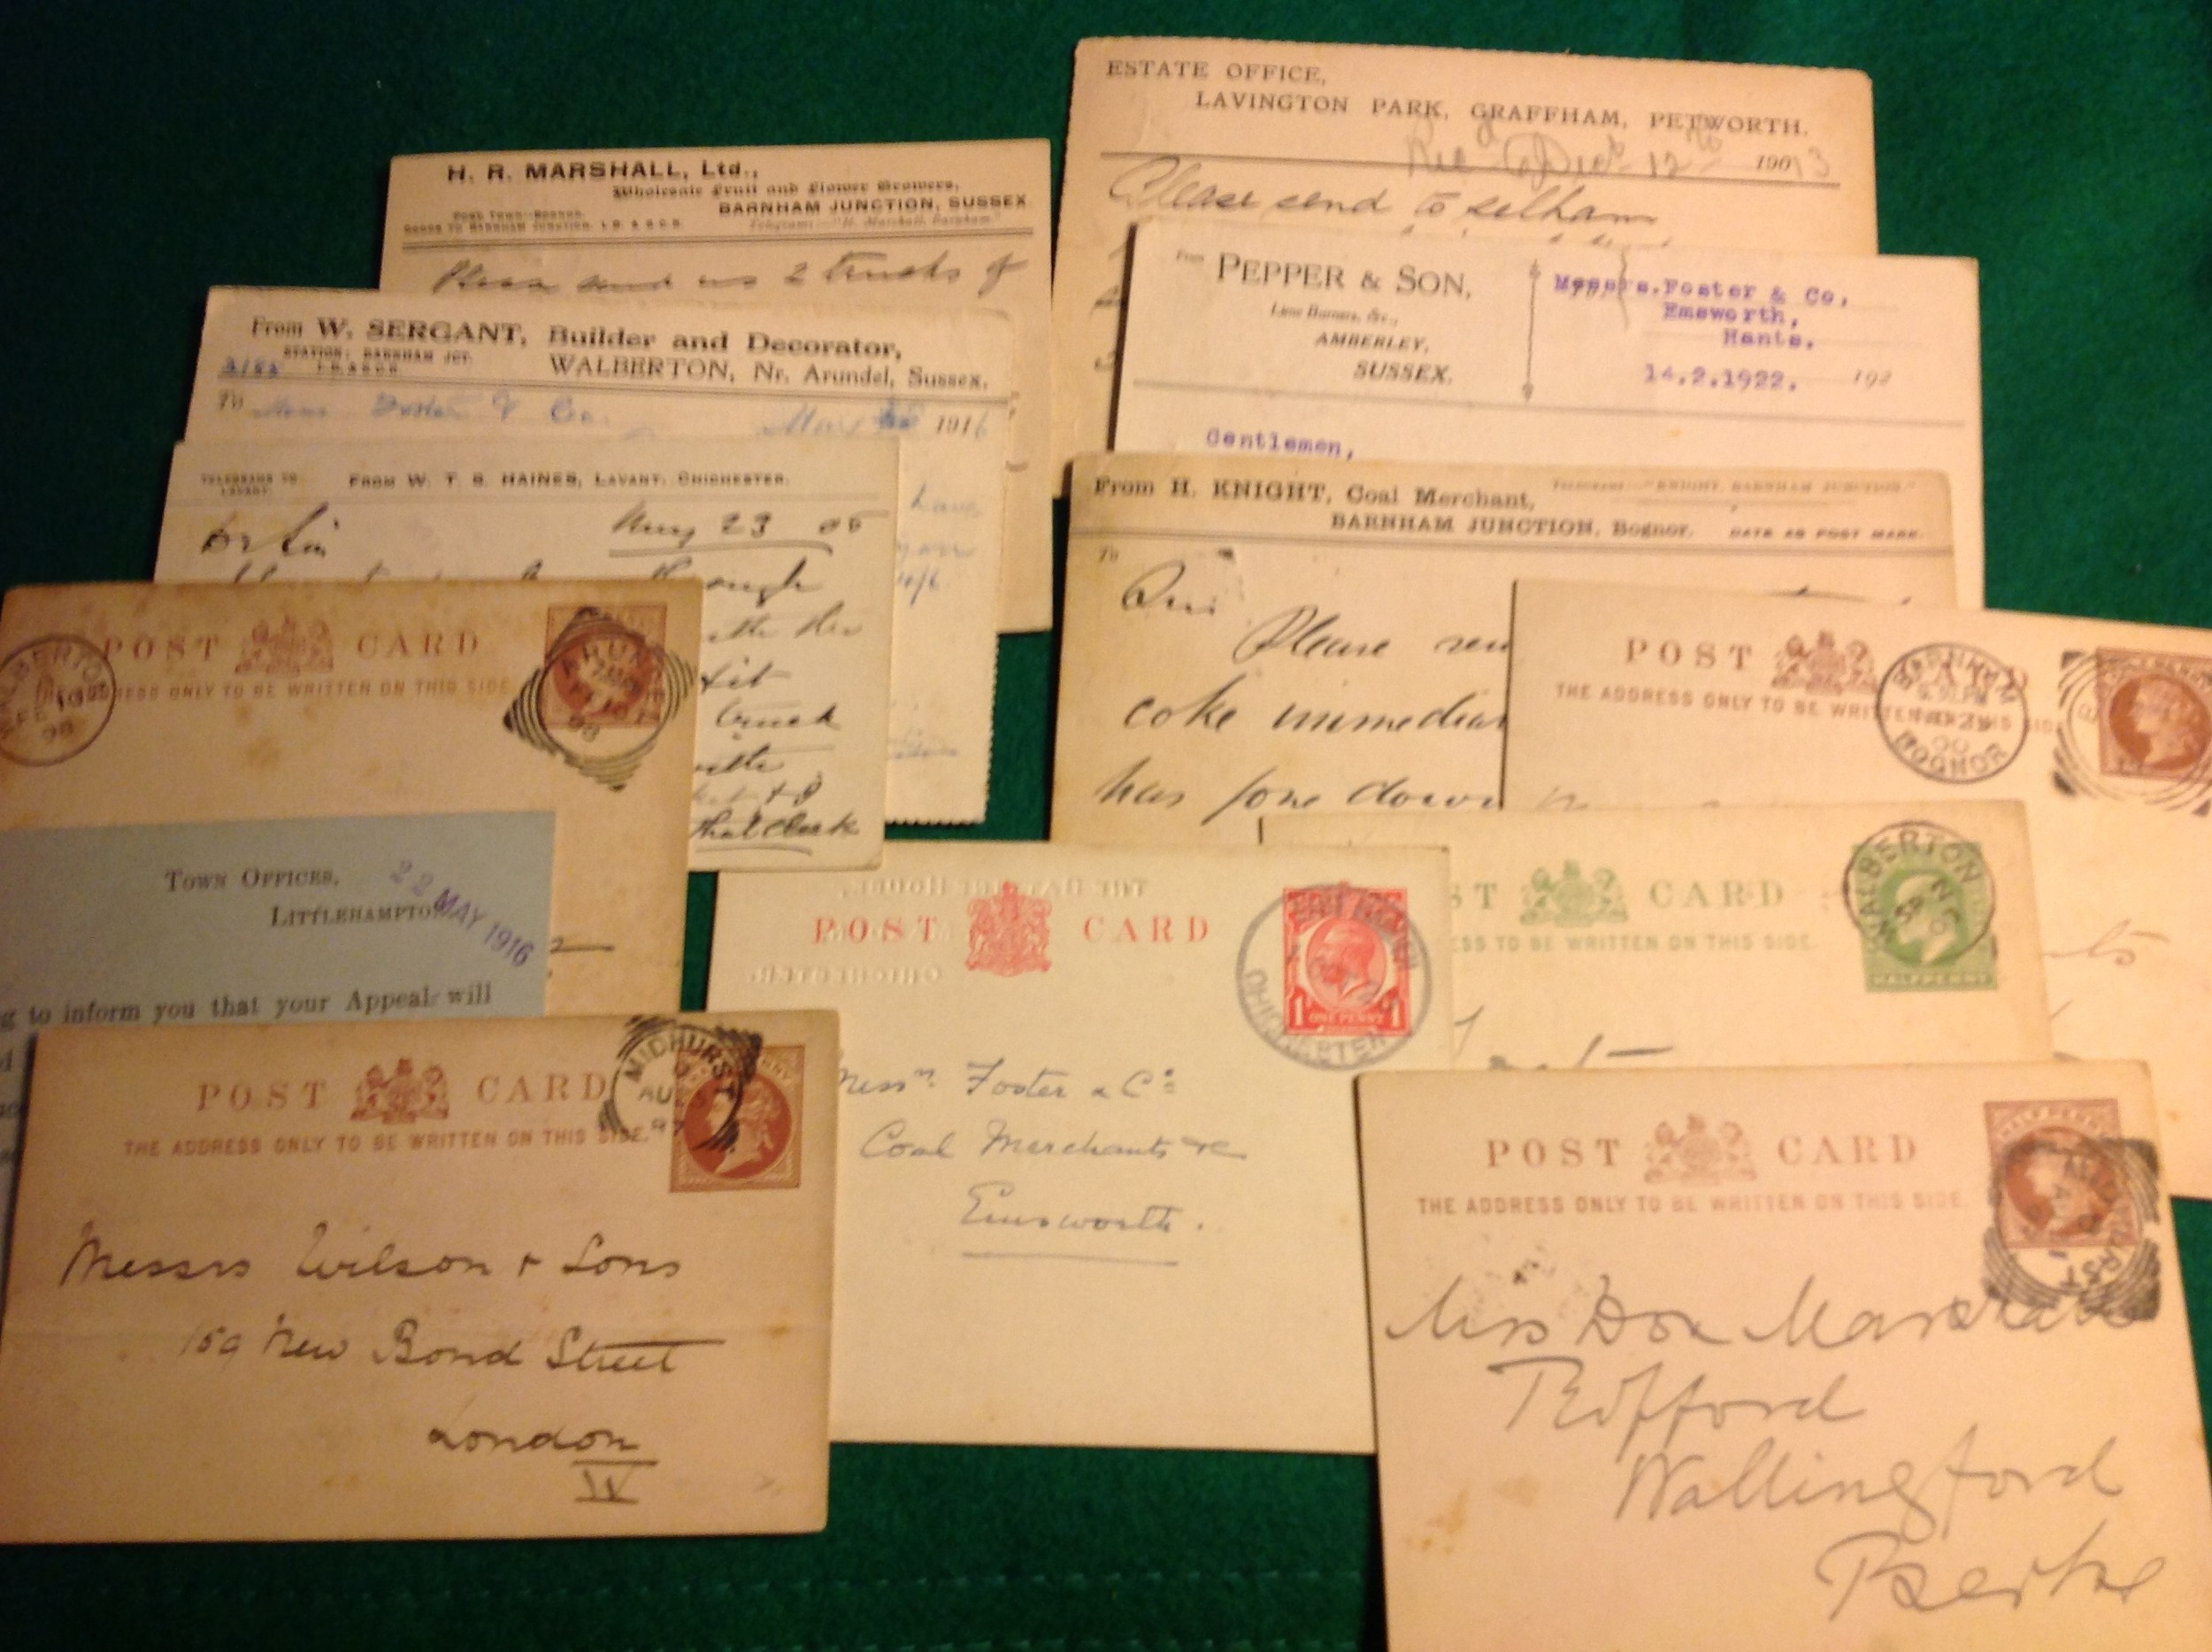 Sussex postal history with some interesting local history cards sent by traders to the owners of a - Bild 4 aus 5